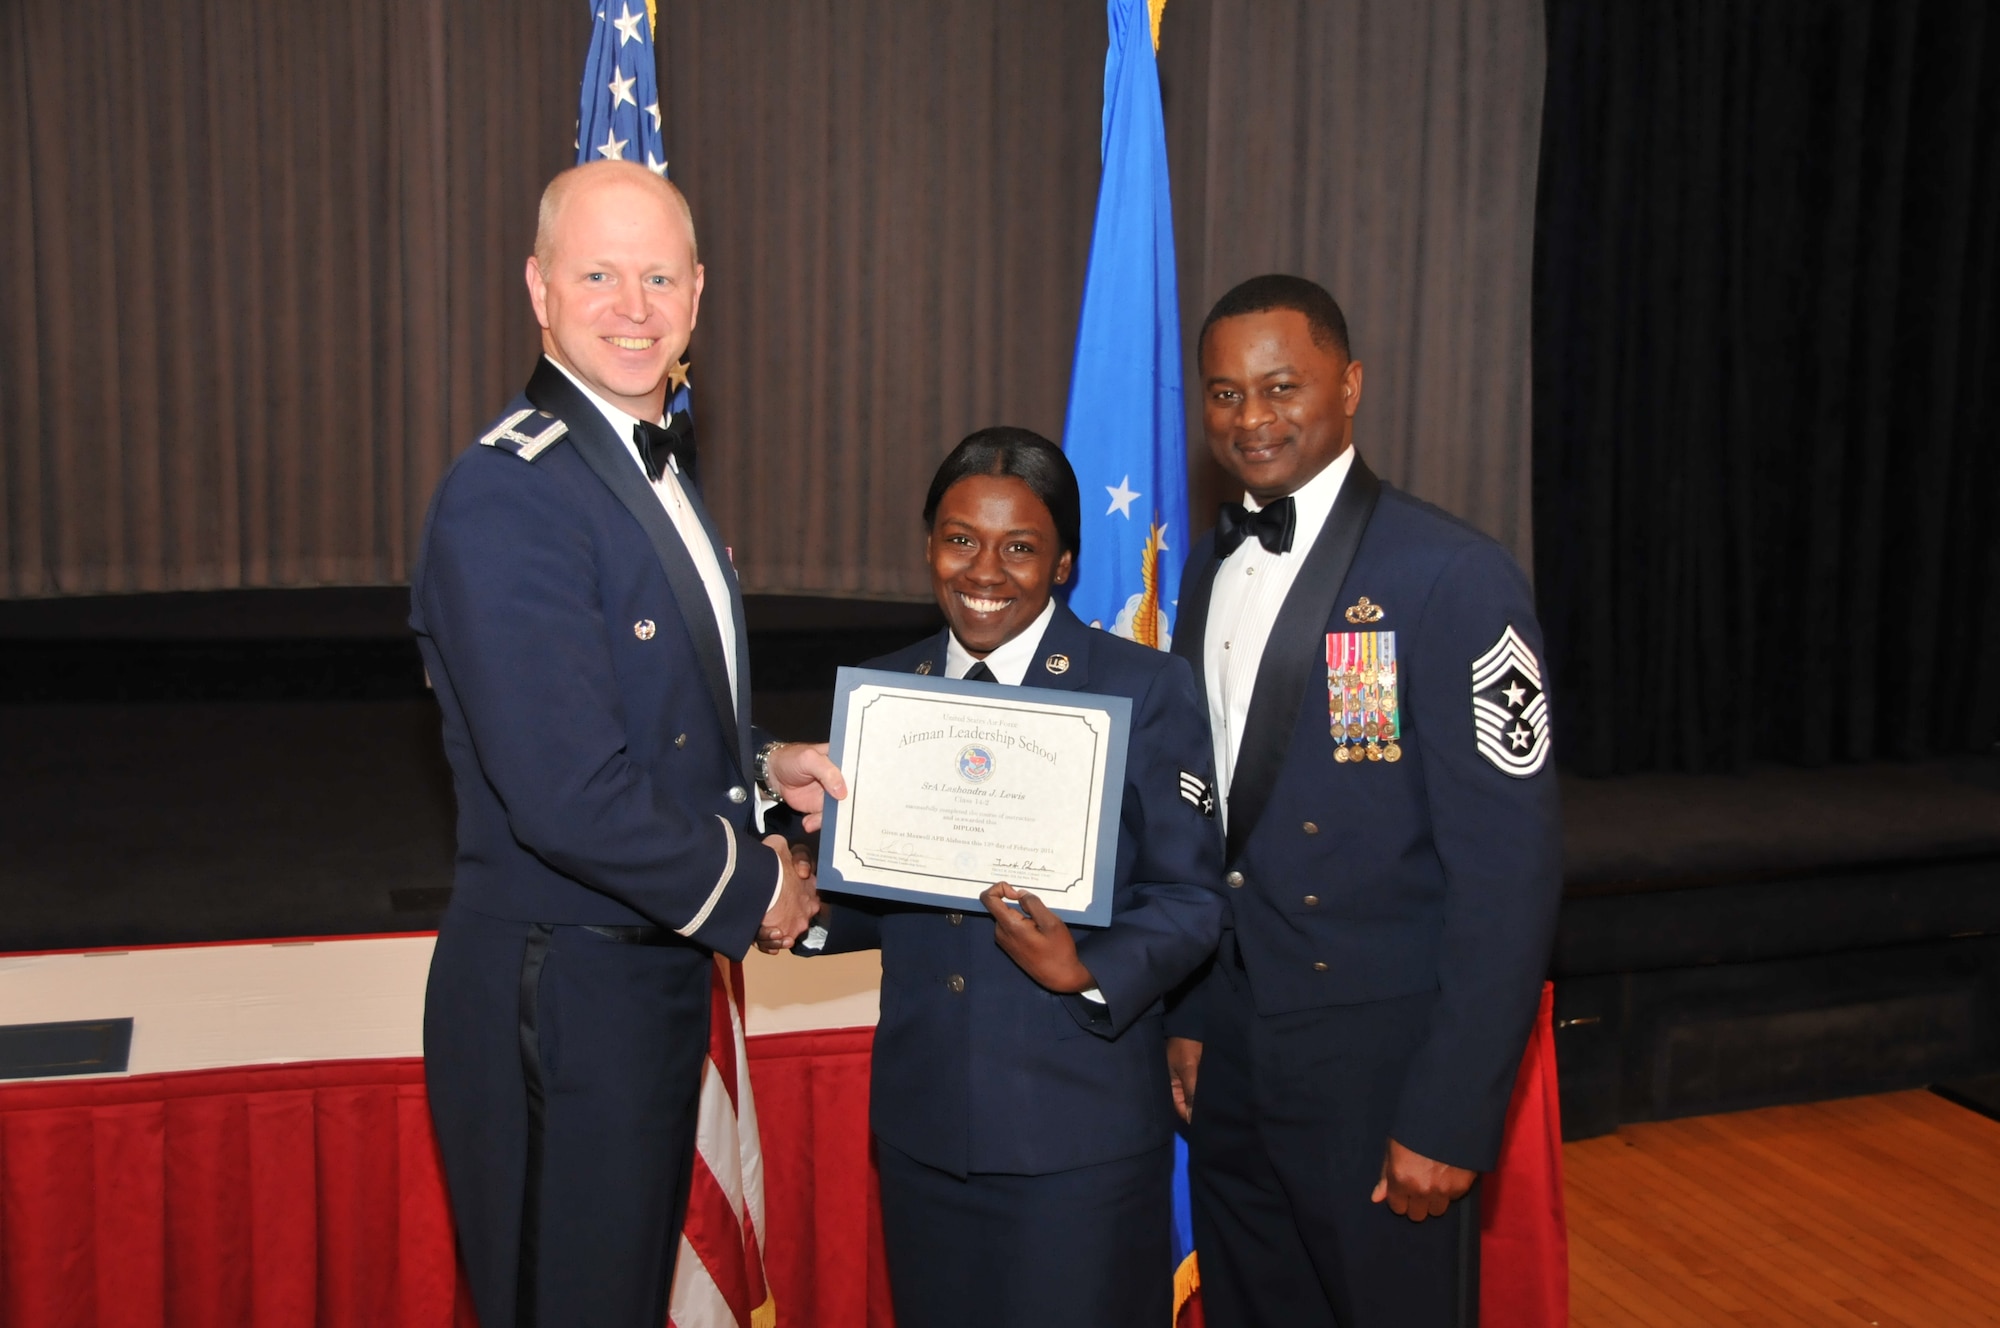 U.S. Air Force Col. Mark Ramsey, Vice Commander 42nd Air Base Wing, and Chief Master Sgt. Harry Hutchinson, Command Chief 42nd Air Base Wing, presents the Airman Leadership School graduating diploma to Senior Airman Lashondra Lewis, 187th Security Forces Squadron, at Maxwell Air Force Base, Ala., Feb. 13, 2014. Airman Leadership School teaches leadership and supervisory skills to Senior Airmen and is required for Airmen to become Noncommissioned Officers. (U.S. Air Force photo by Tech. Sgt. Matthew Garrett)